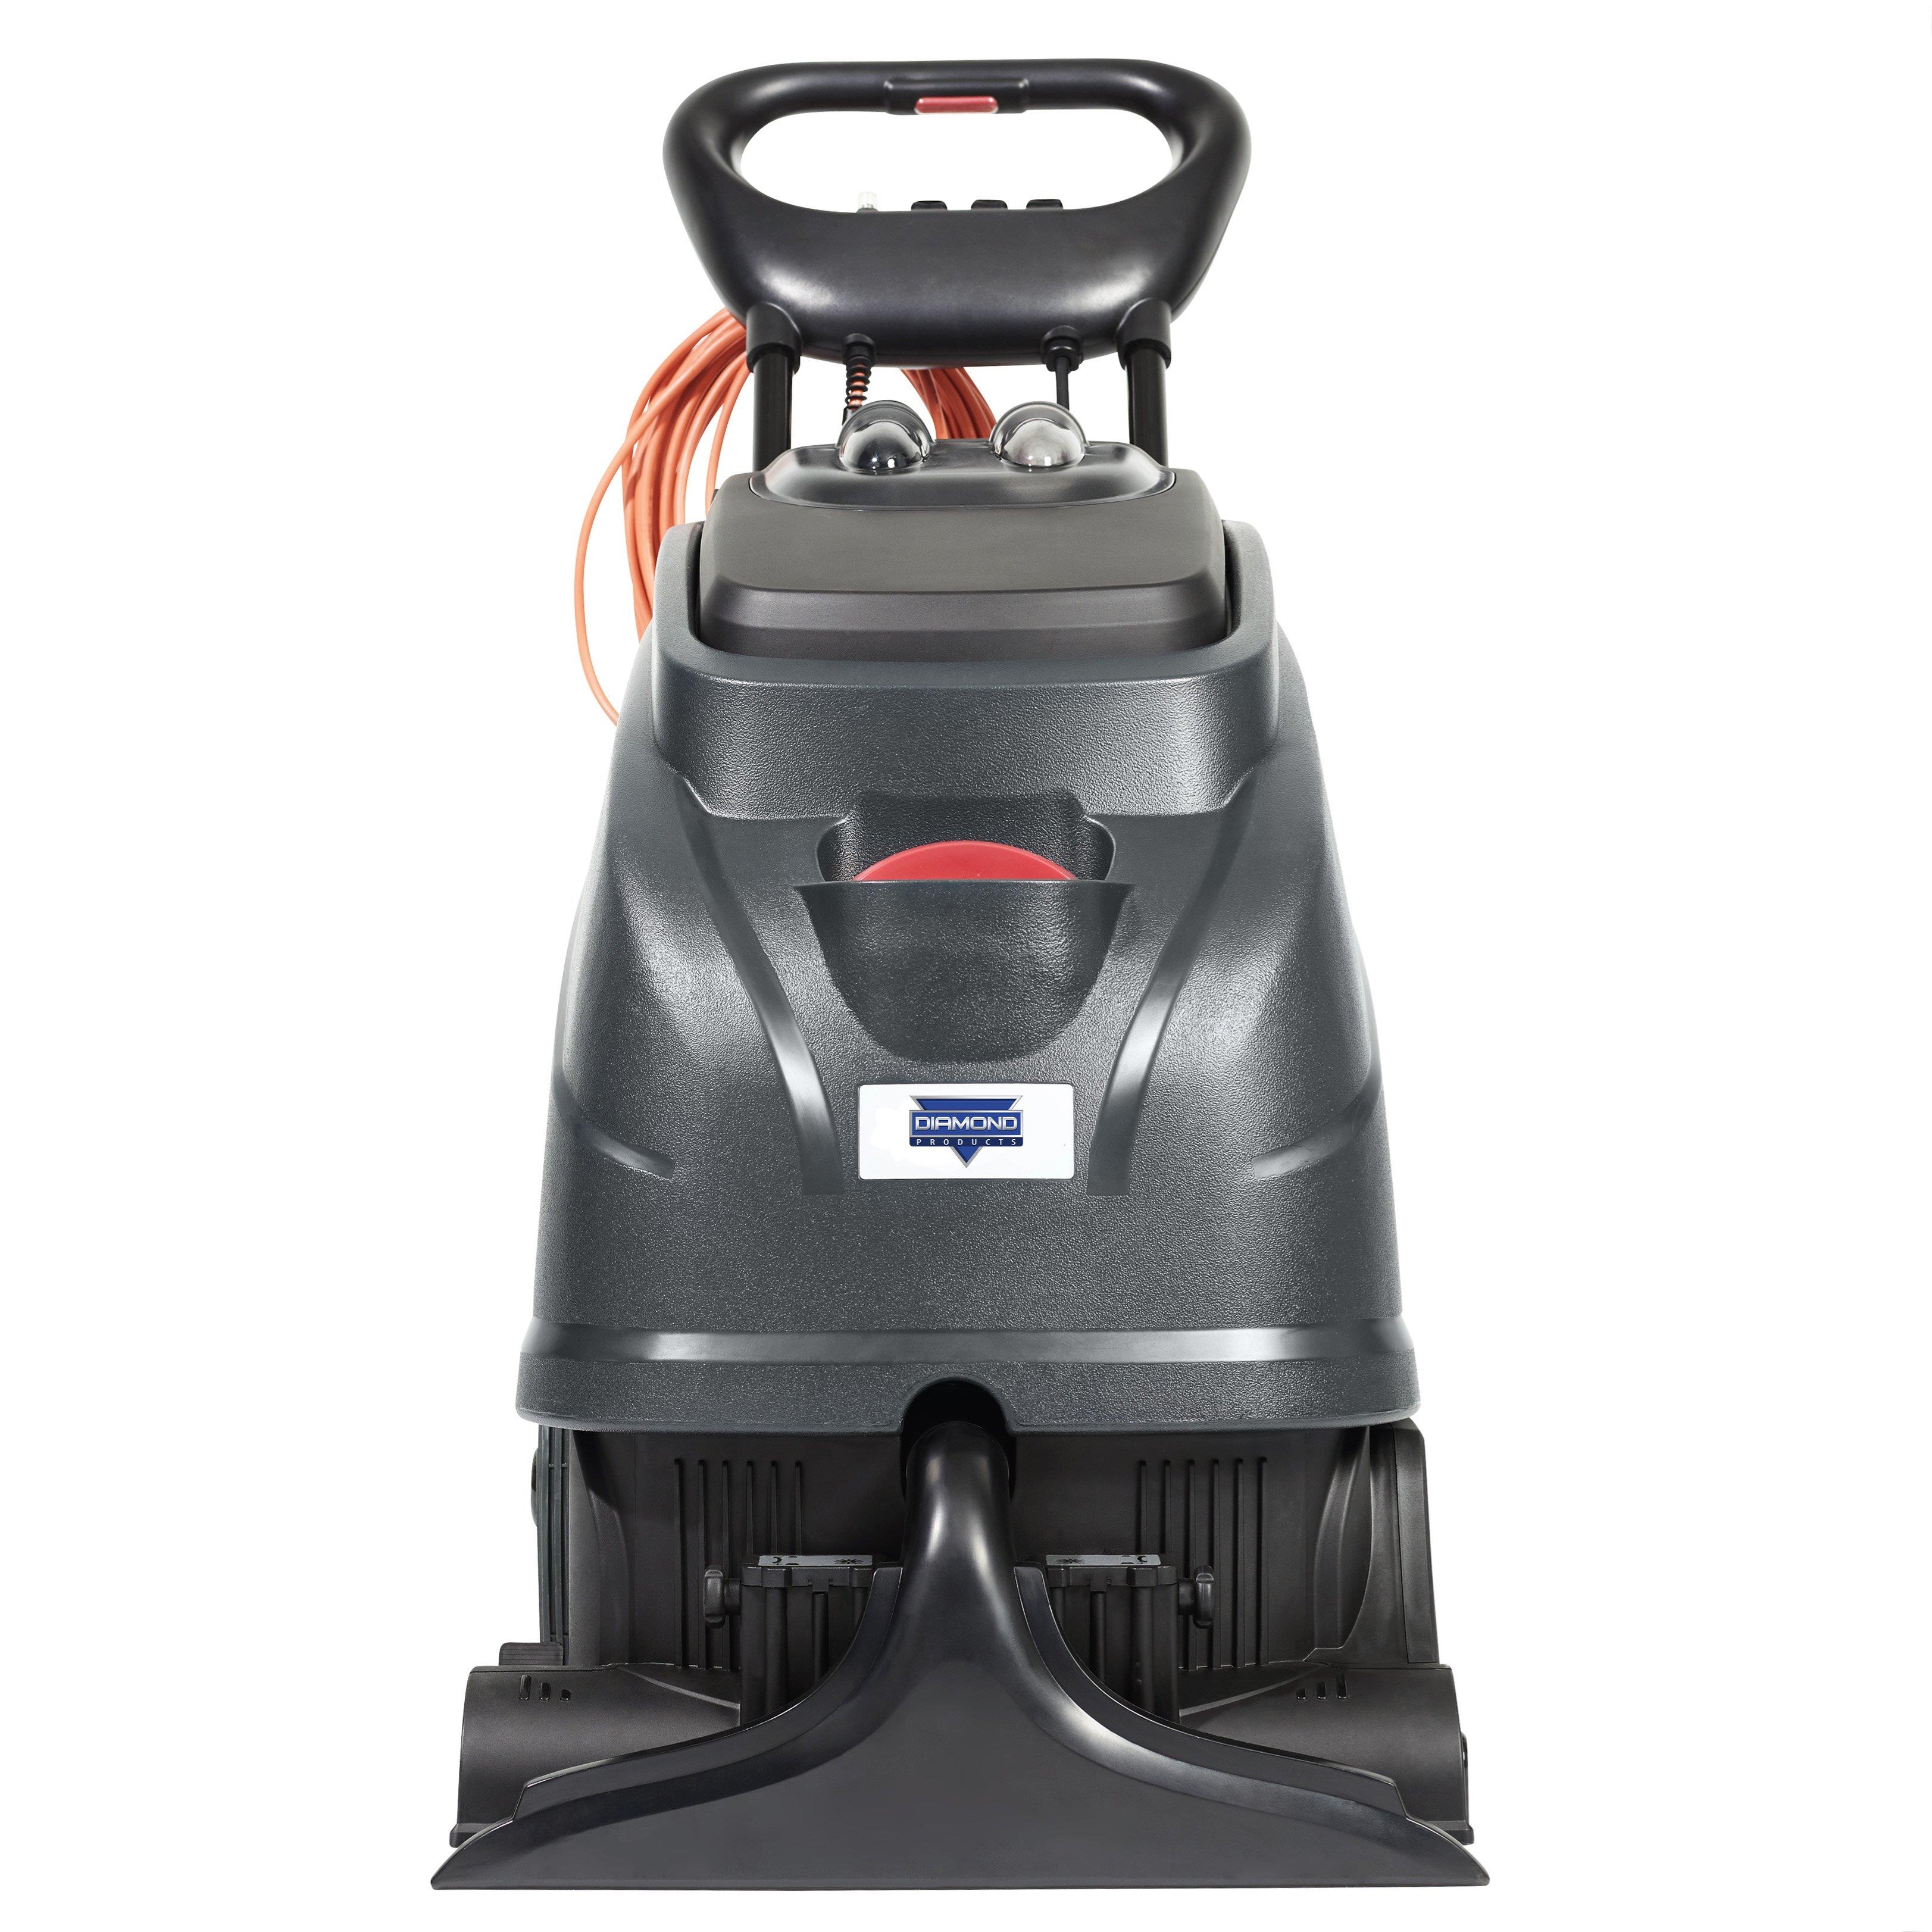 Diamond Cex410 Walk Behind Carpet Extractor W Brush 16 Inch Janitorial Direct